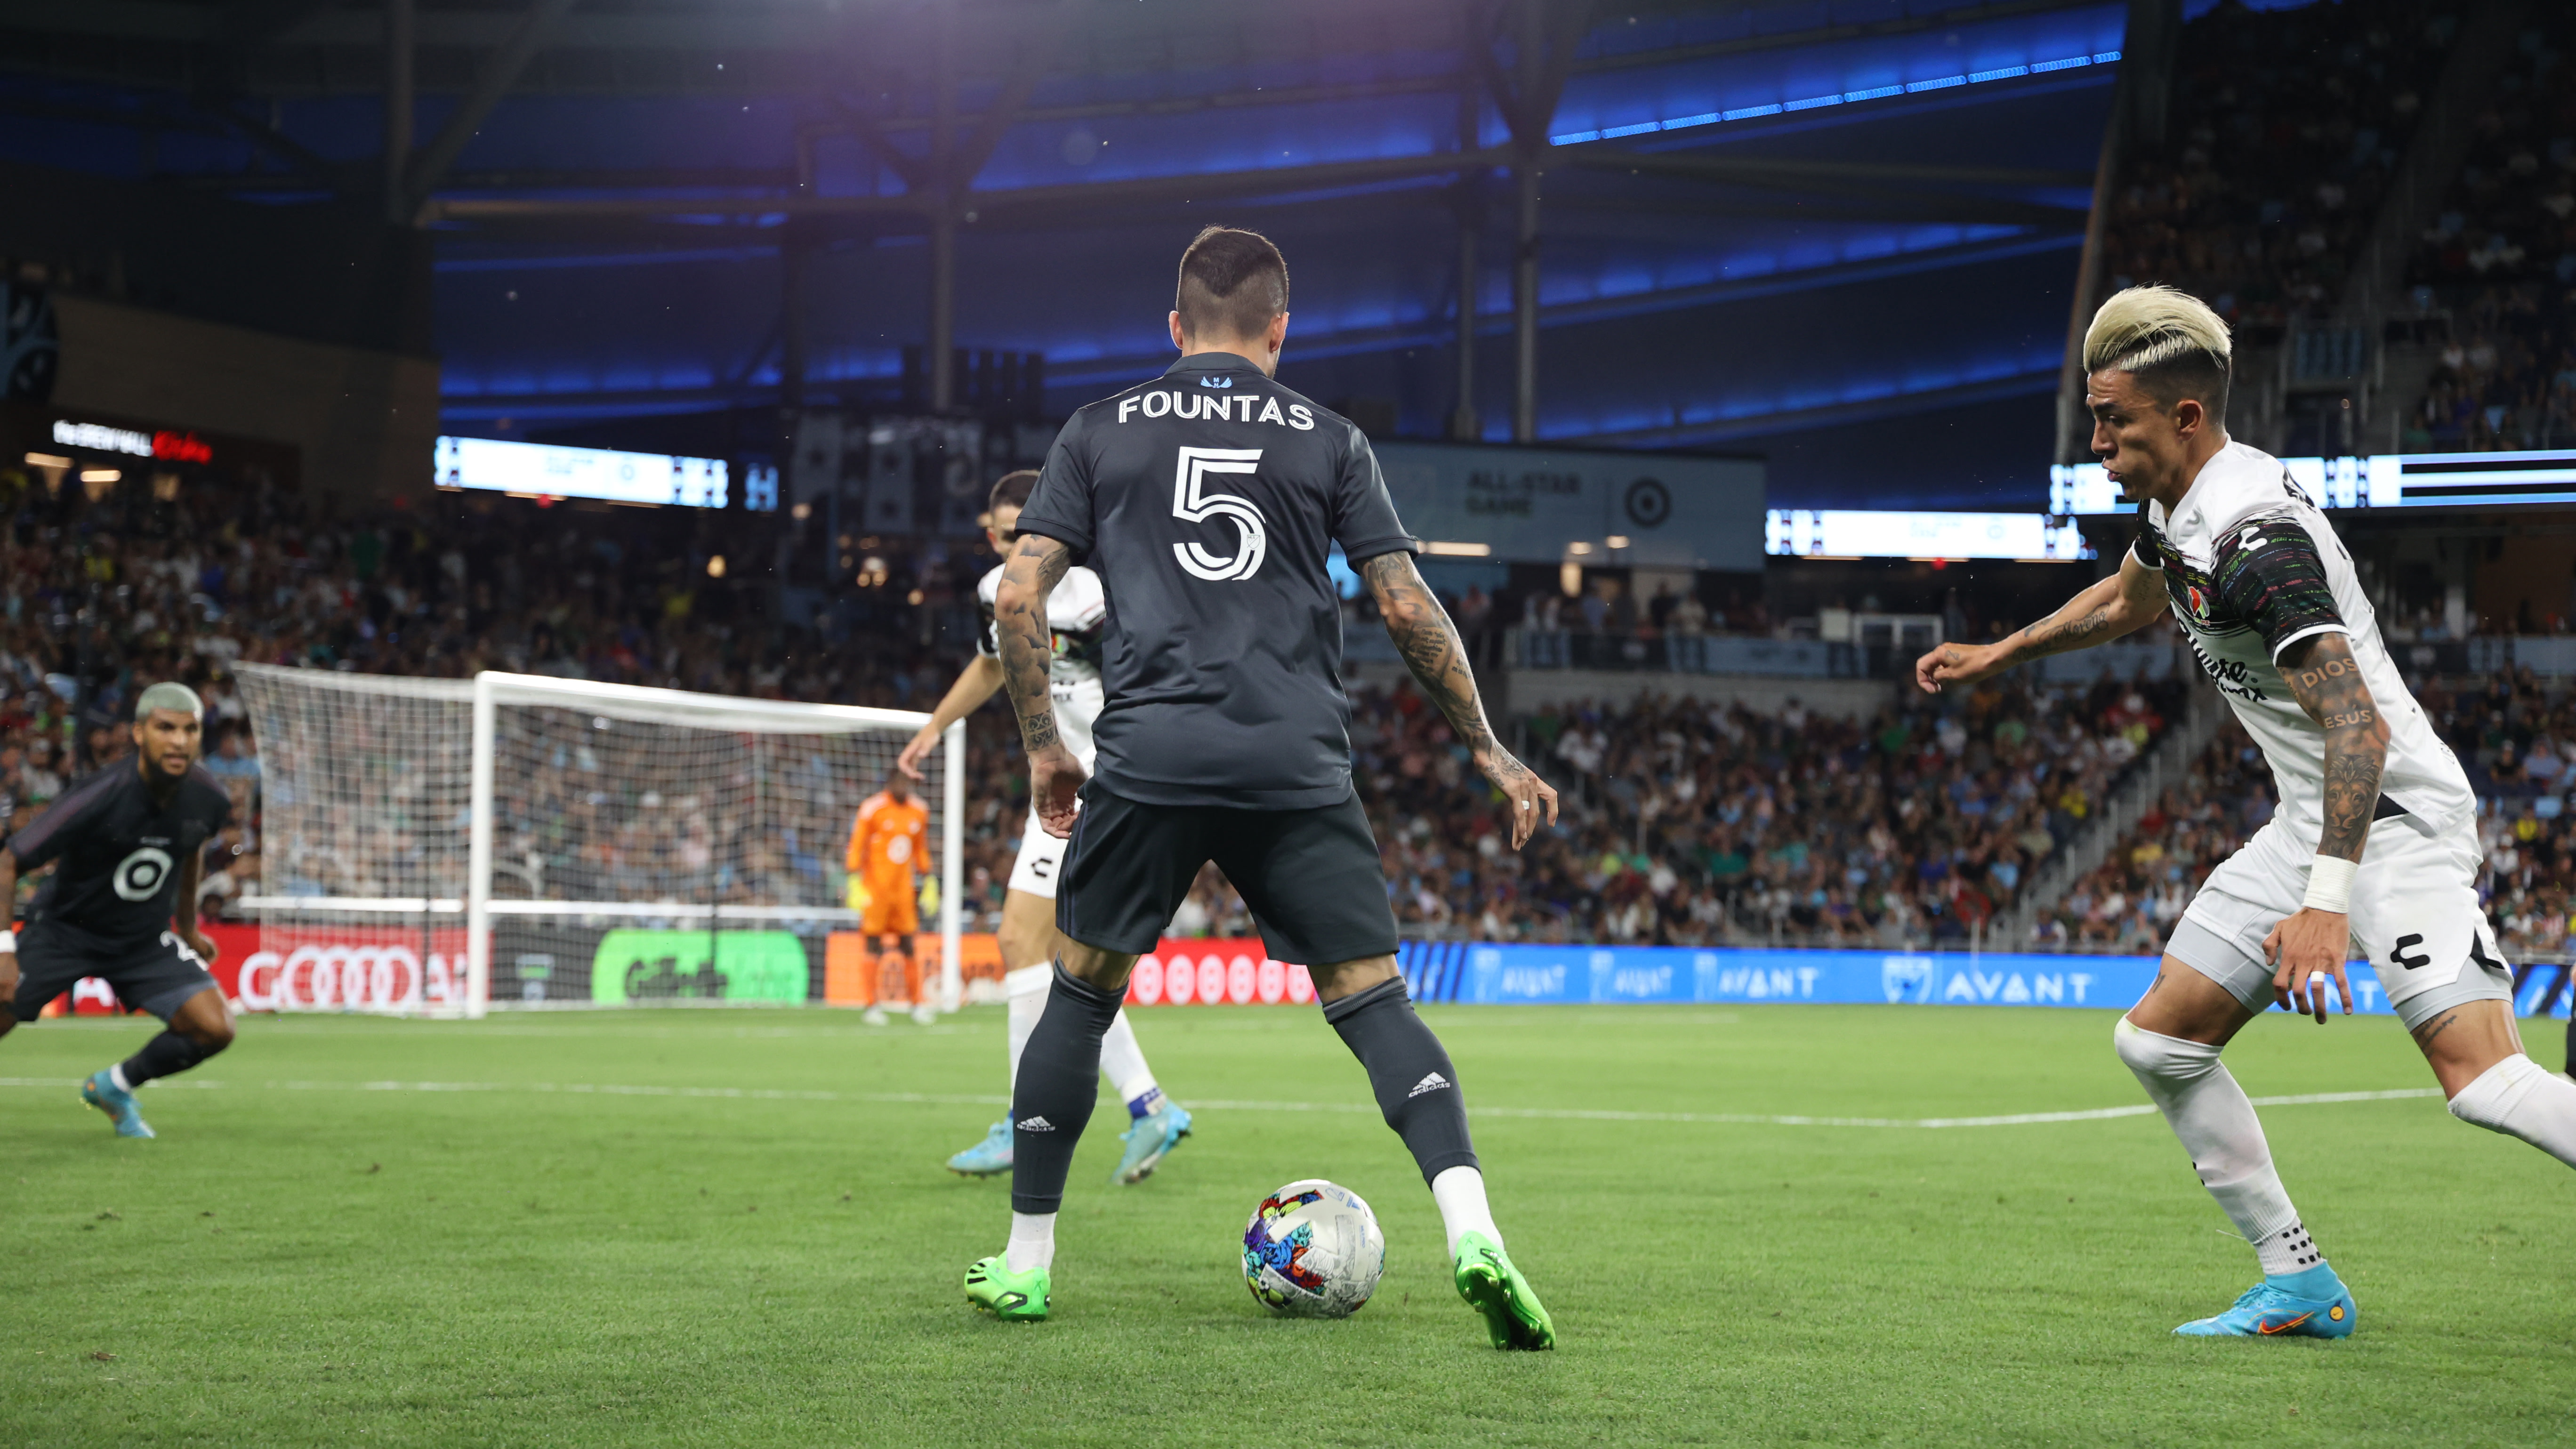 Why Taxi Wore No. 5 at the MLS All-Star Game